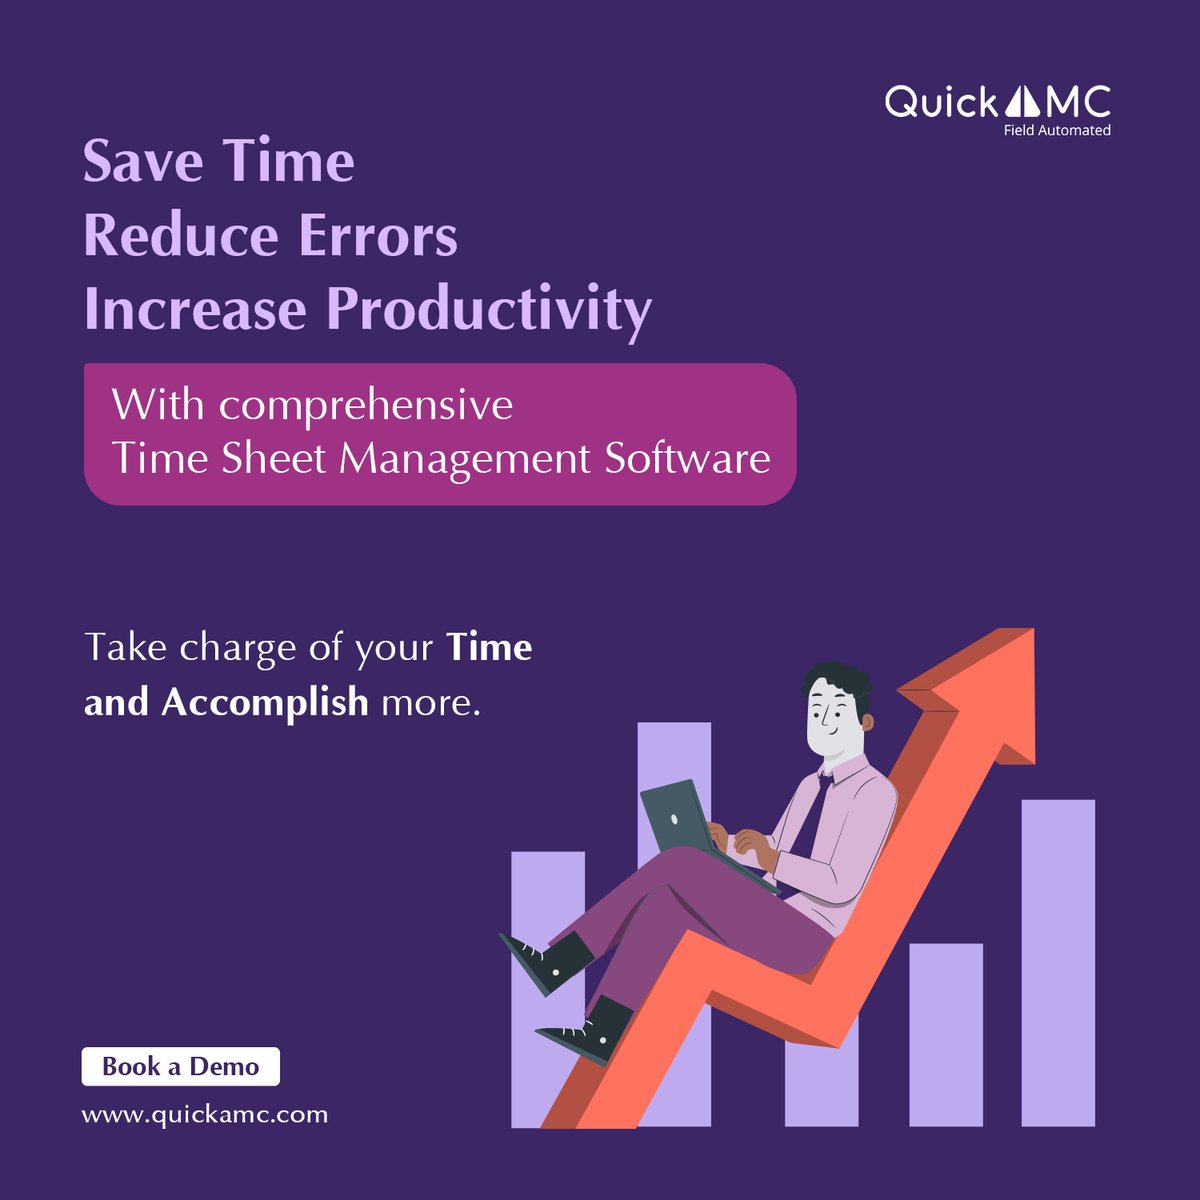 Experience hassle-free timesheet management with our powerful software solution.
Contact us for a personalized demo or start your free trial now!
.
.
.
#quickamc #amc #technology #tech #business #automate #software #iot #fieldautomation #fieldserviceengineer #softwaredeveloper